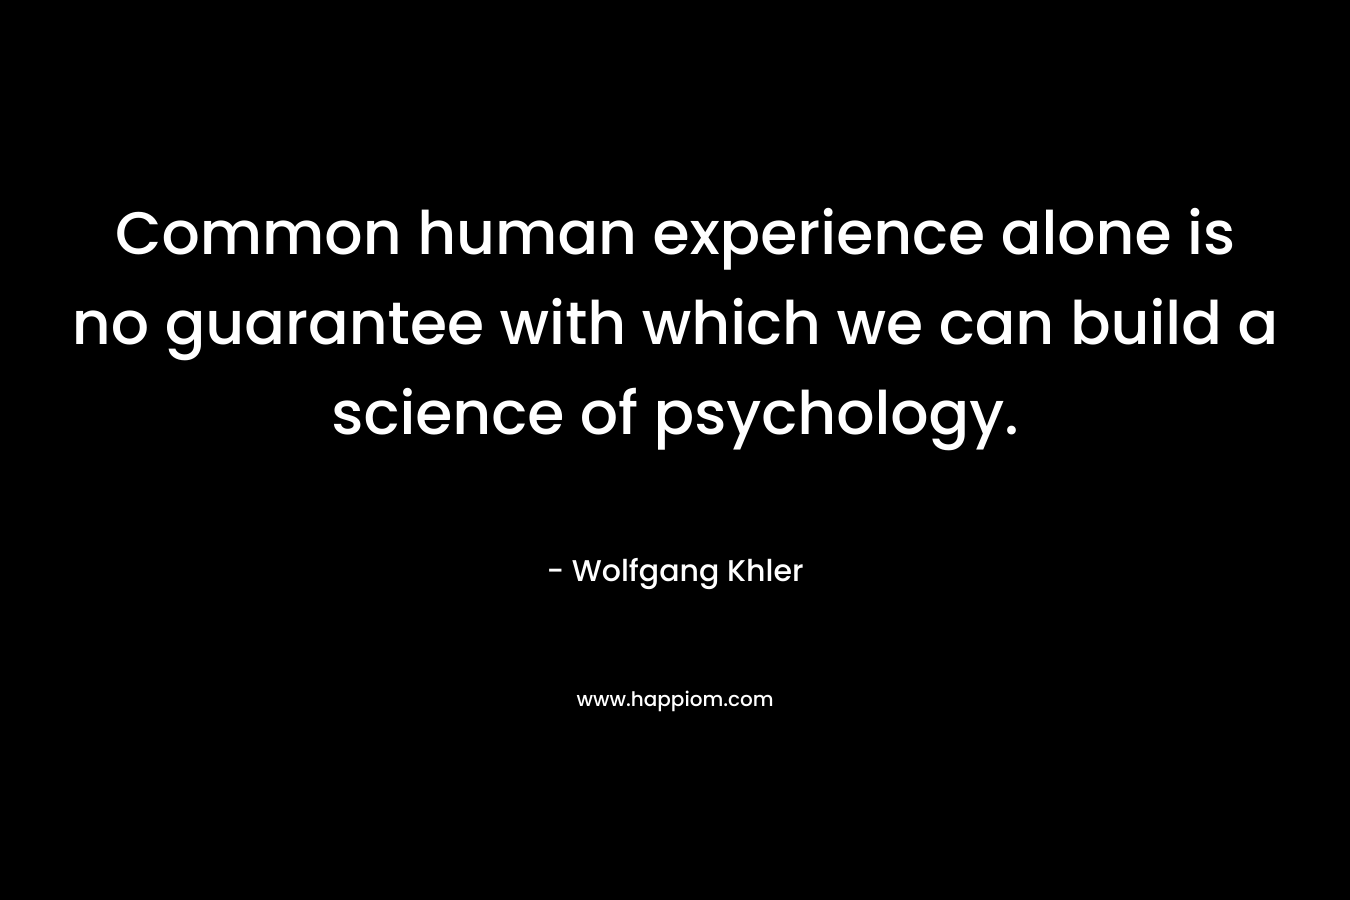 Common human experience alone is no guarantee with which we can build a science of psychology.